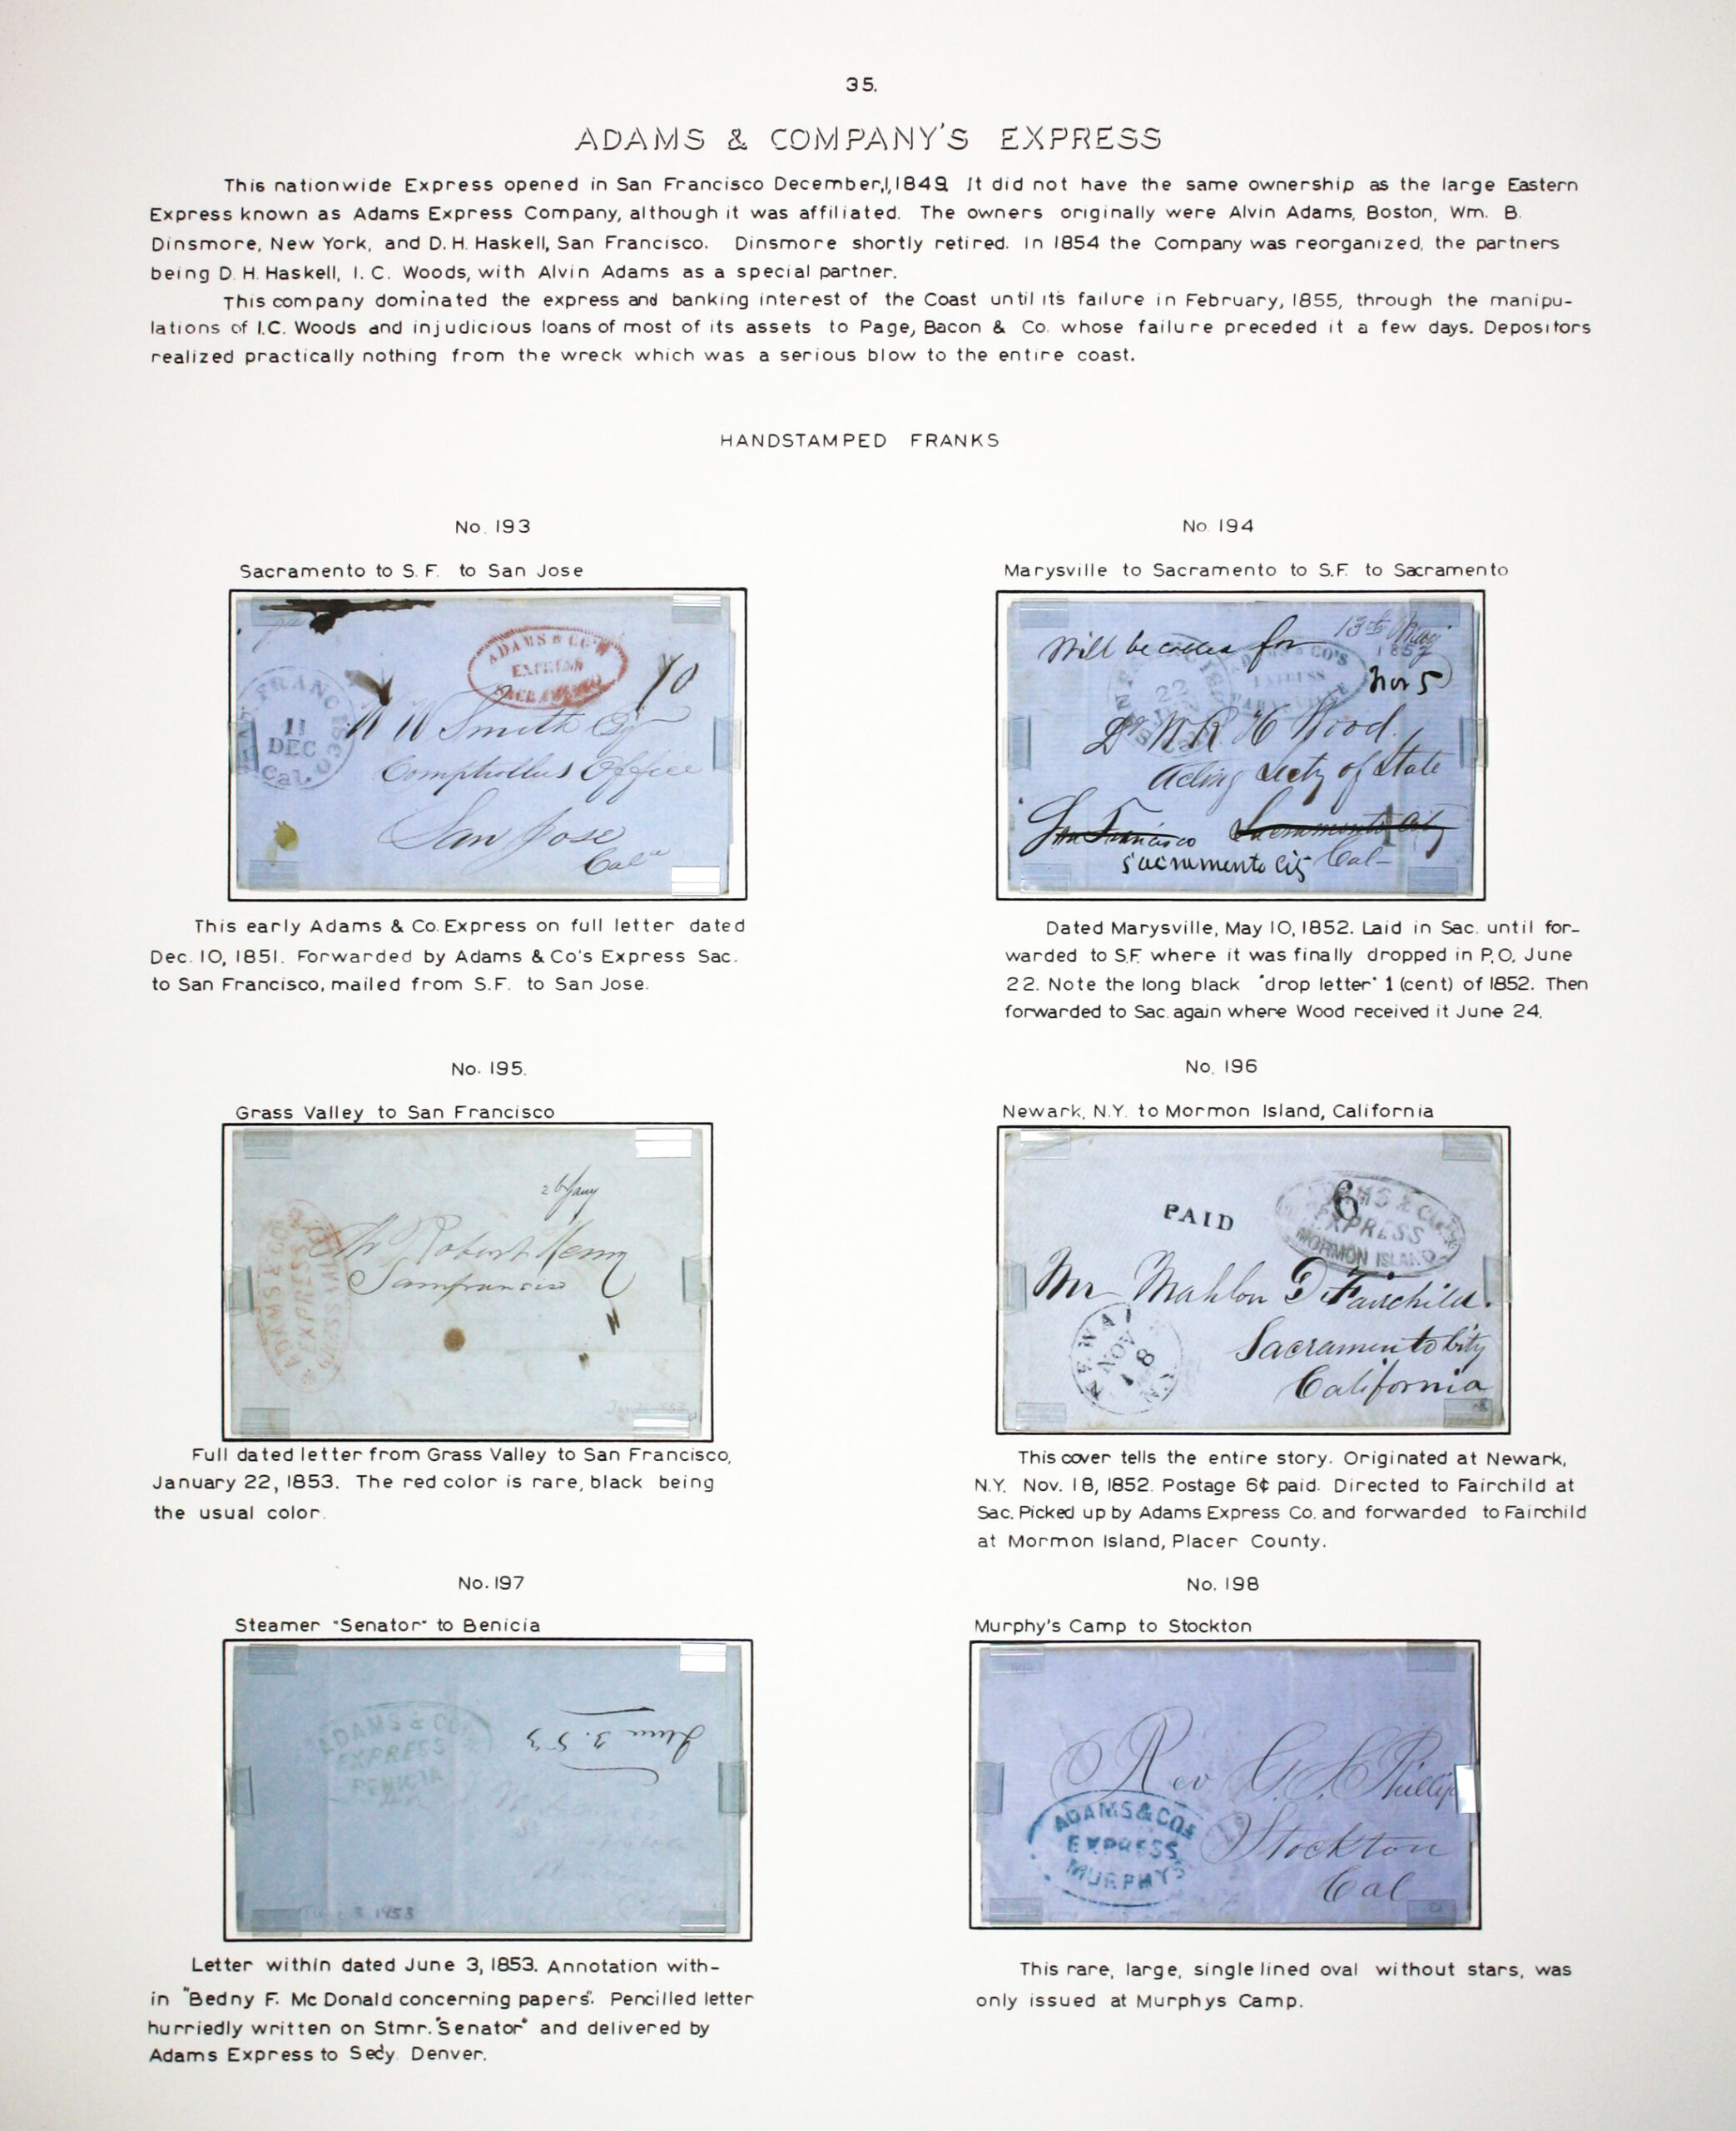 Historic exhibit Panel #35 featuring letter covers. Long descriptions are available as page content. Image link will enlarge image.